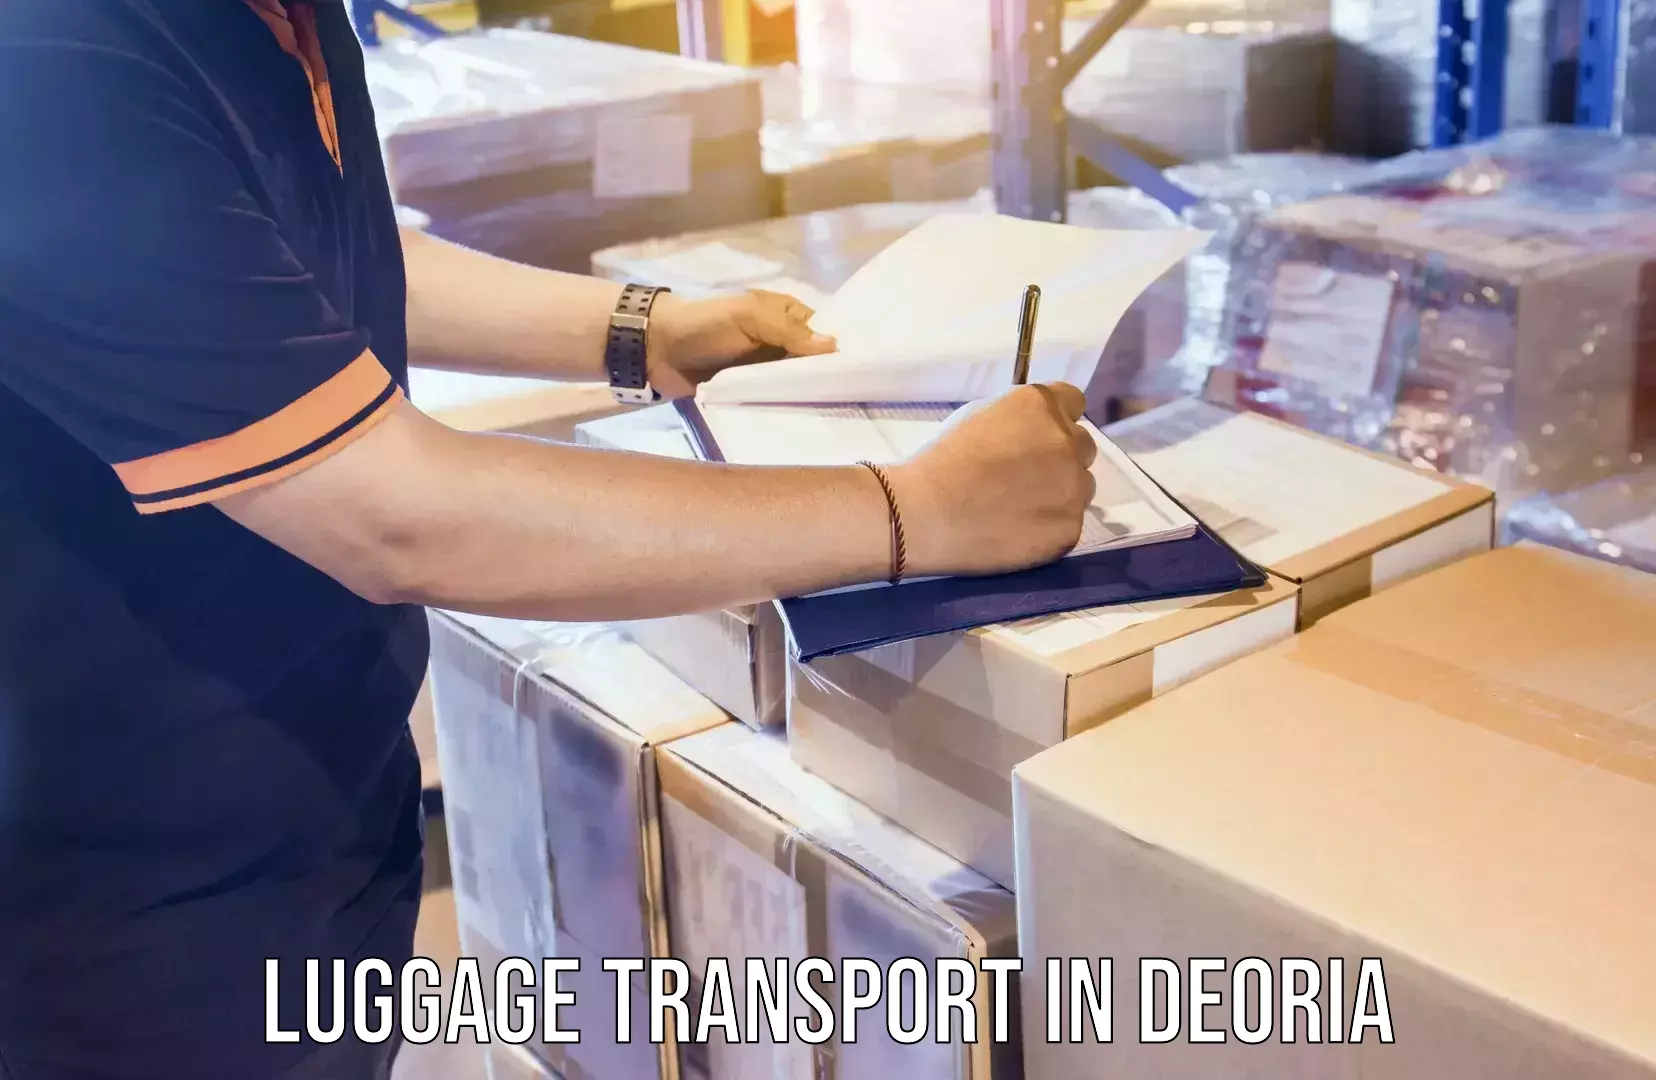 Luggage transport operations in Deoria